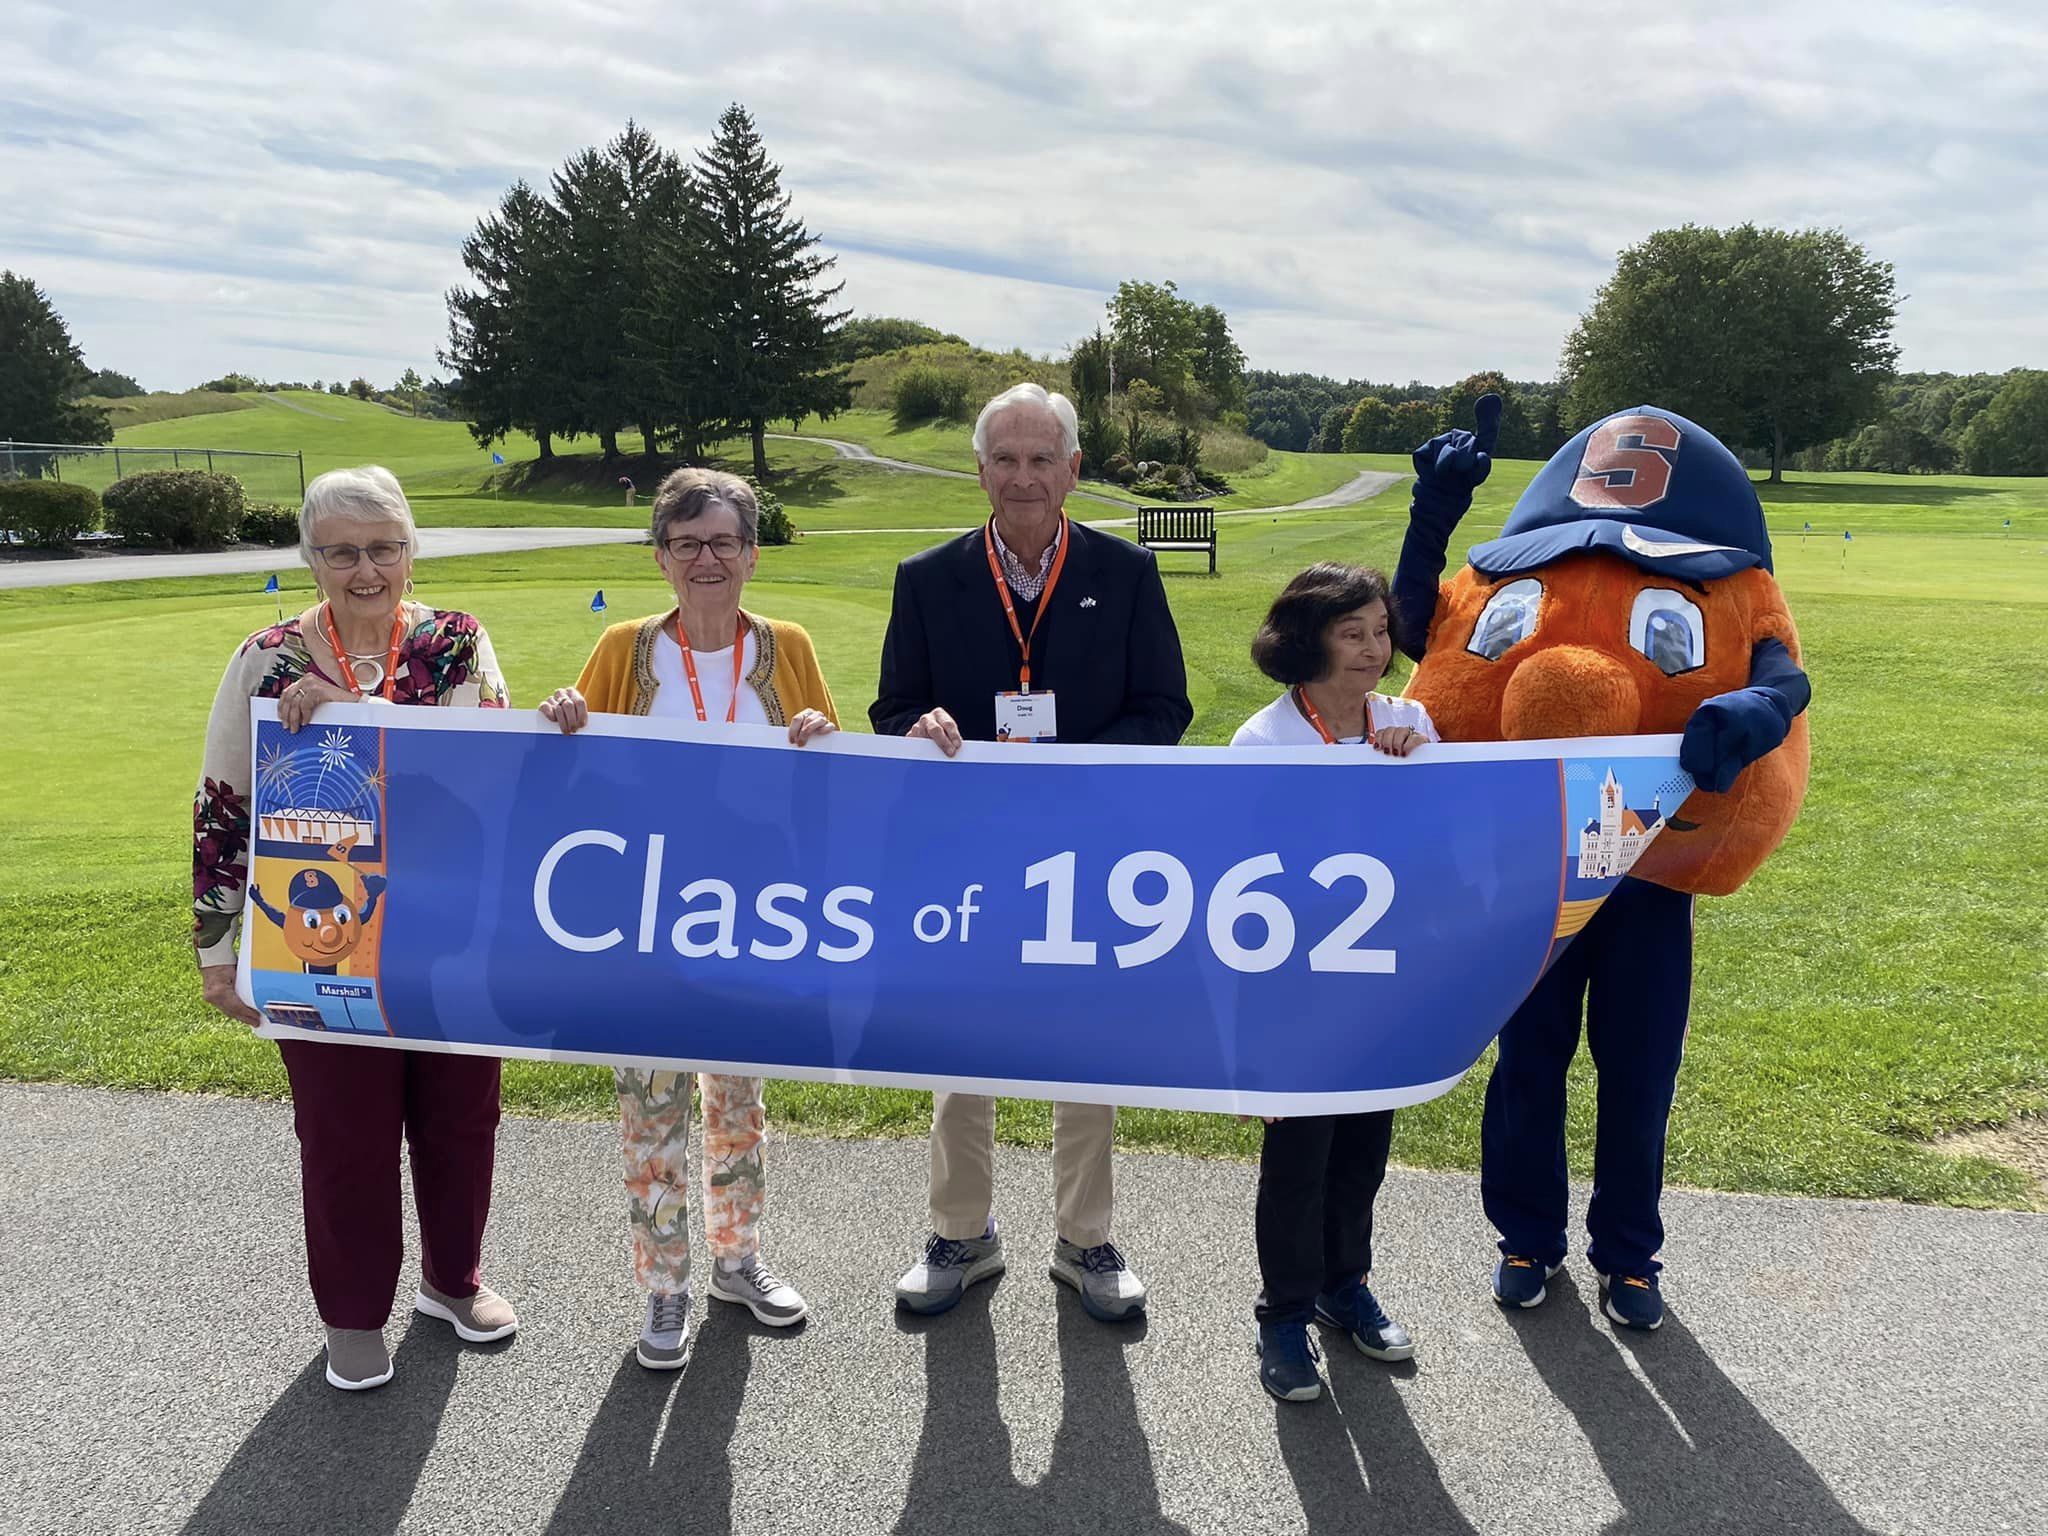 Alumni in the Class of 1962 pose with their class banner.